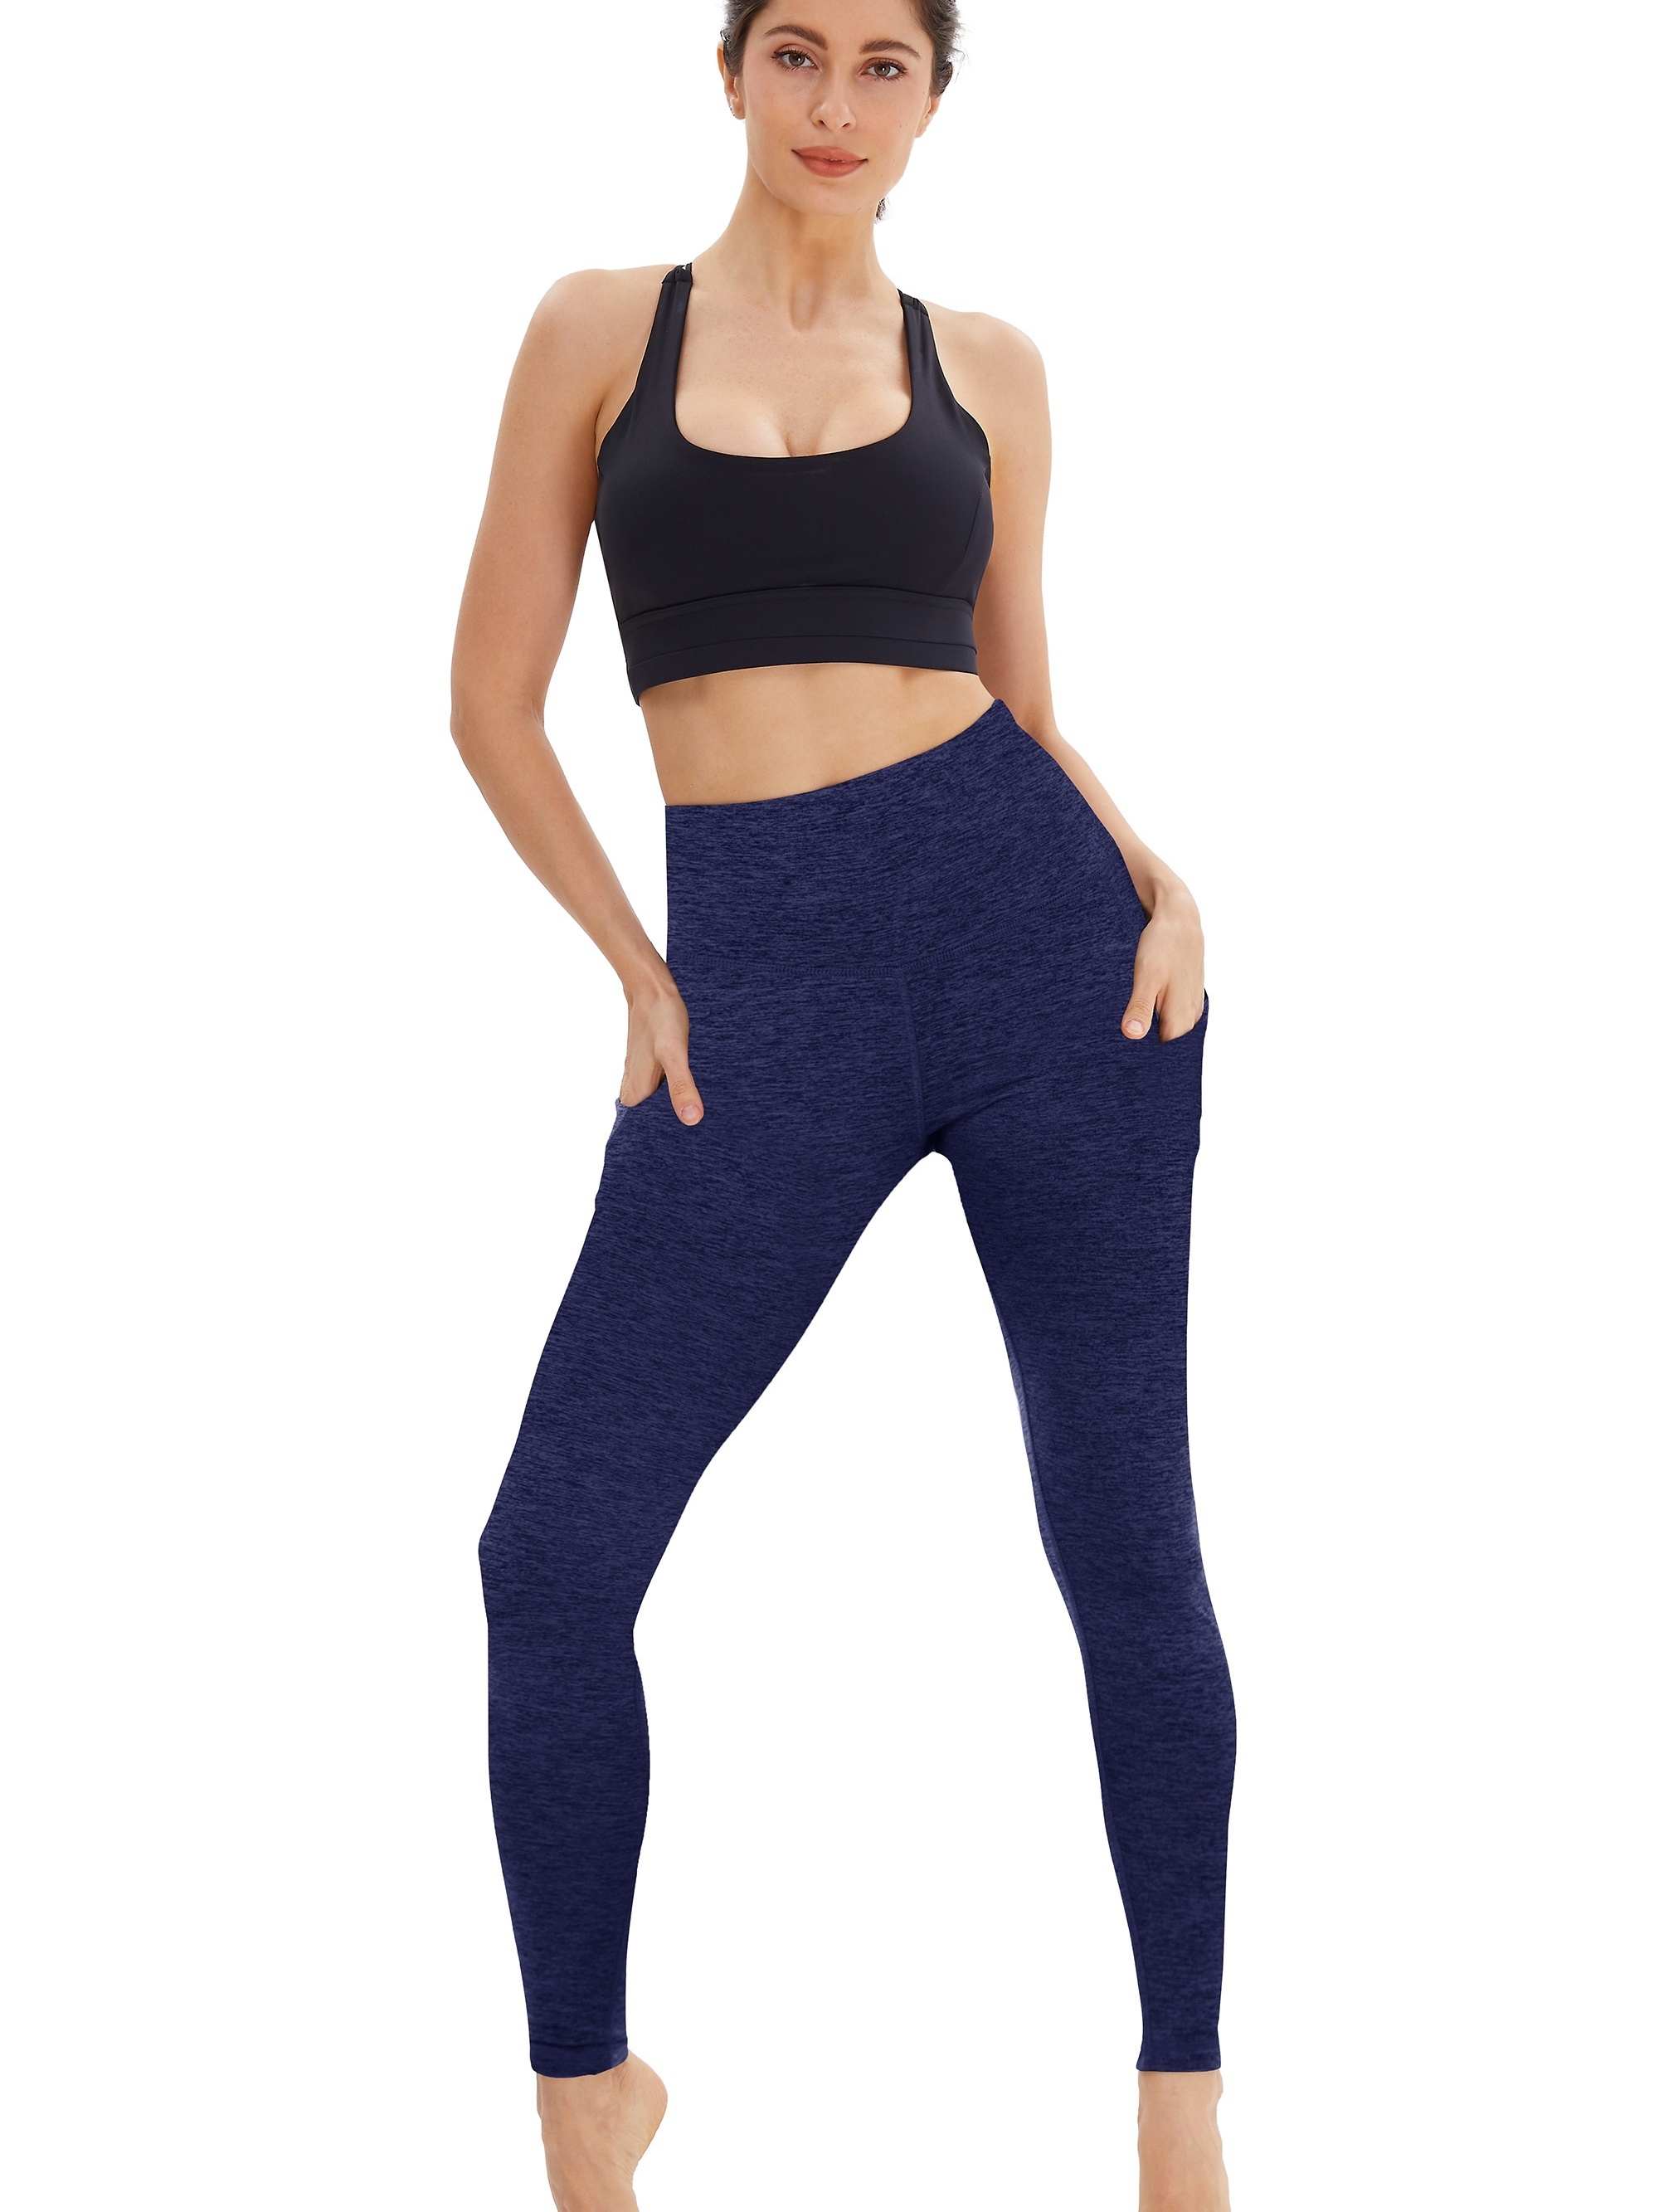 High Waist Yoga Pants For Women, Solid Color Medium Stretch